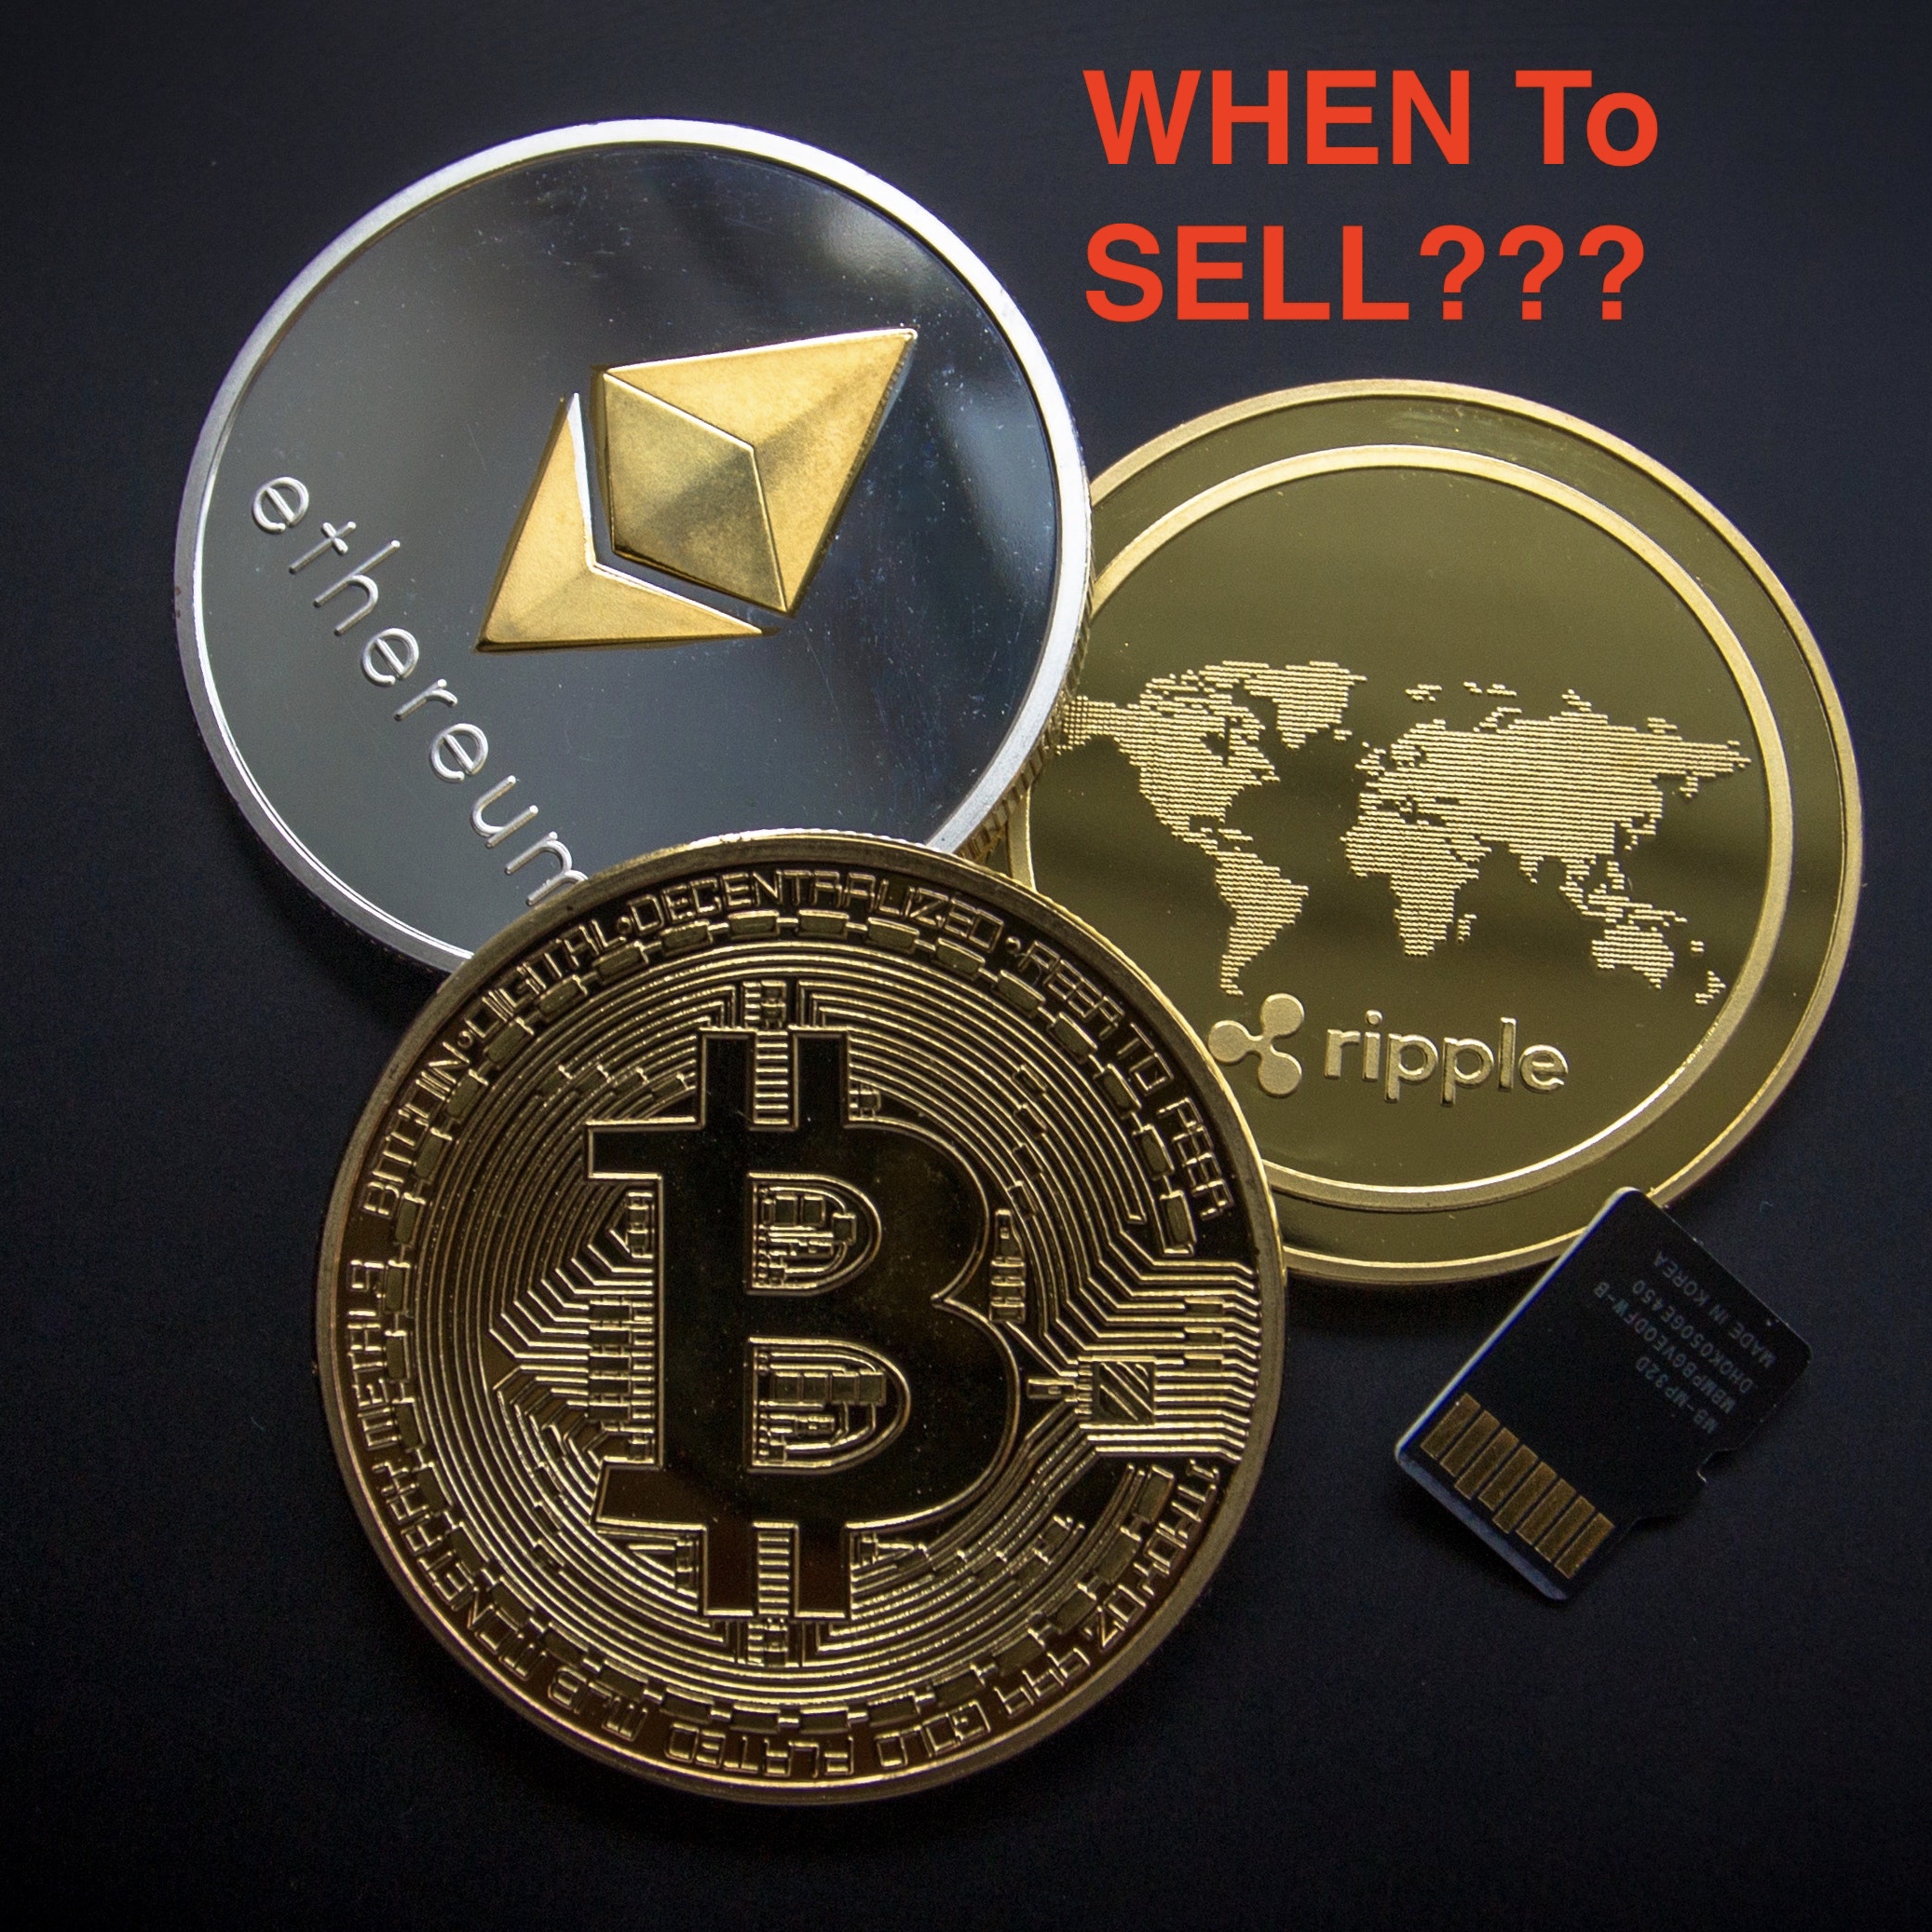 When To Sell Bitcoin And At What EXACT PRICE? Easy Way To Decide With May 2021 Two Bob’s Worth